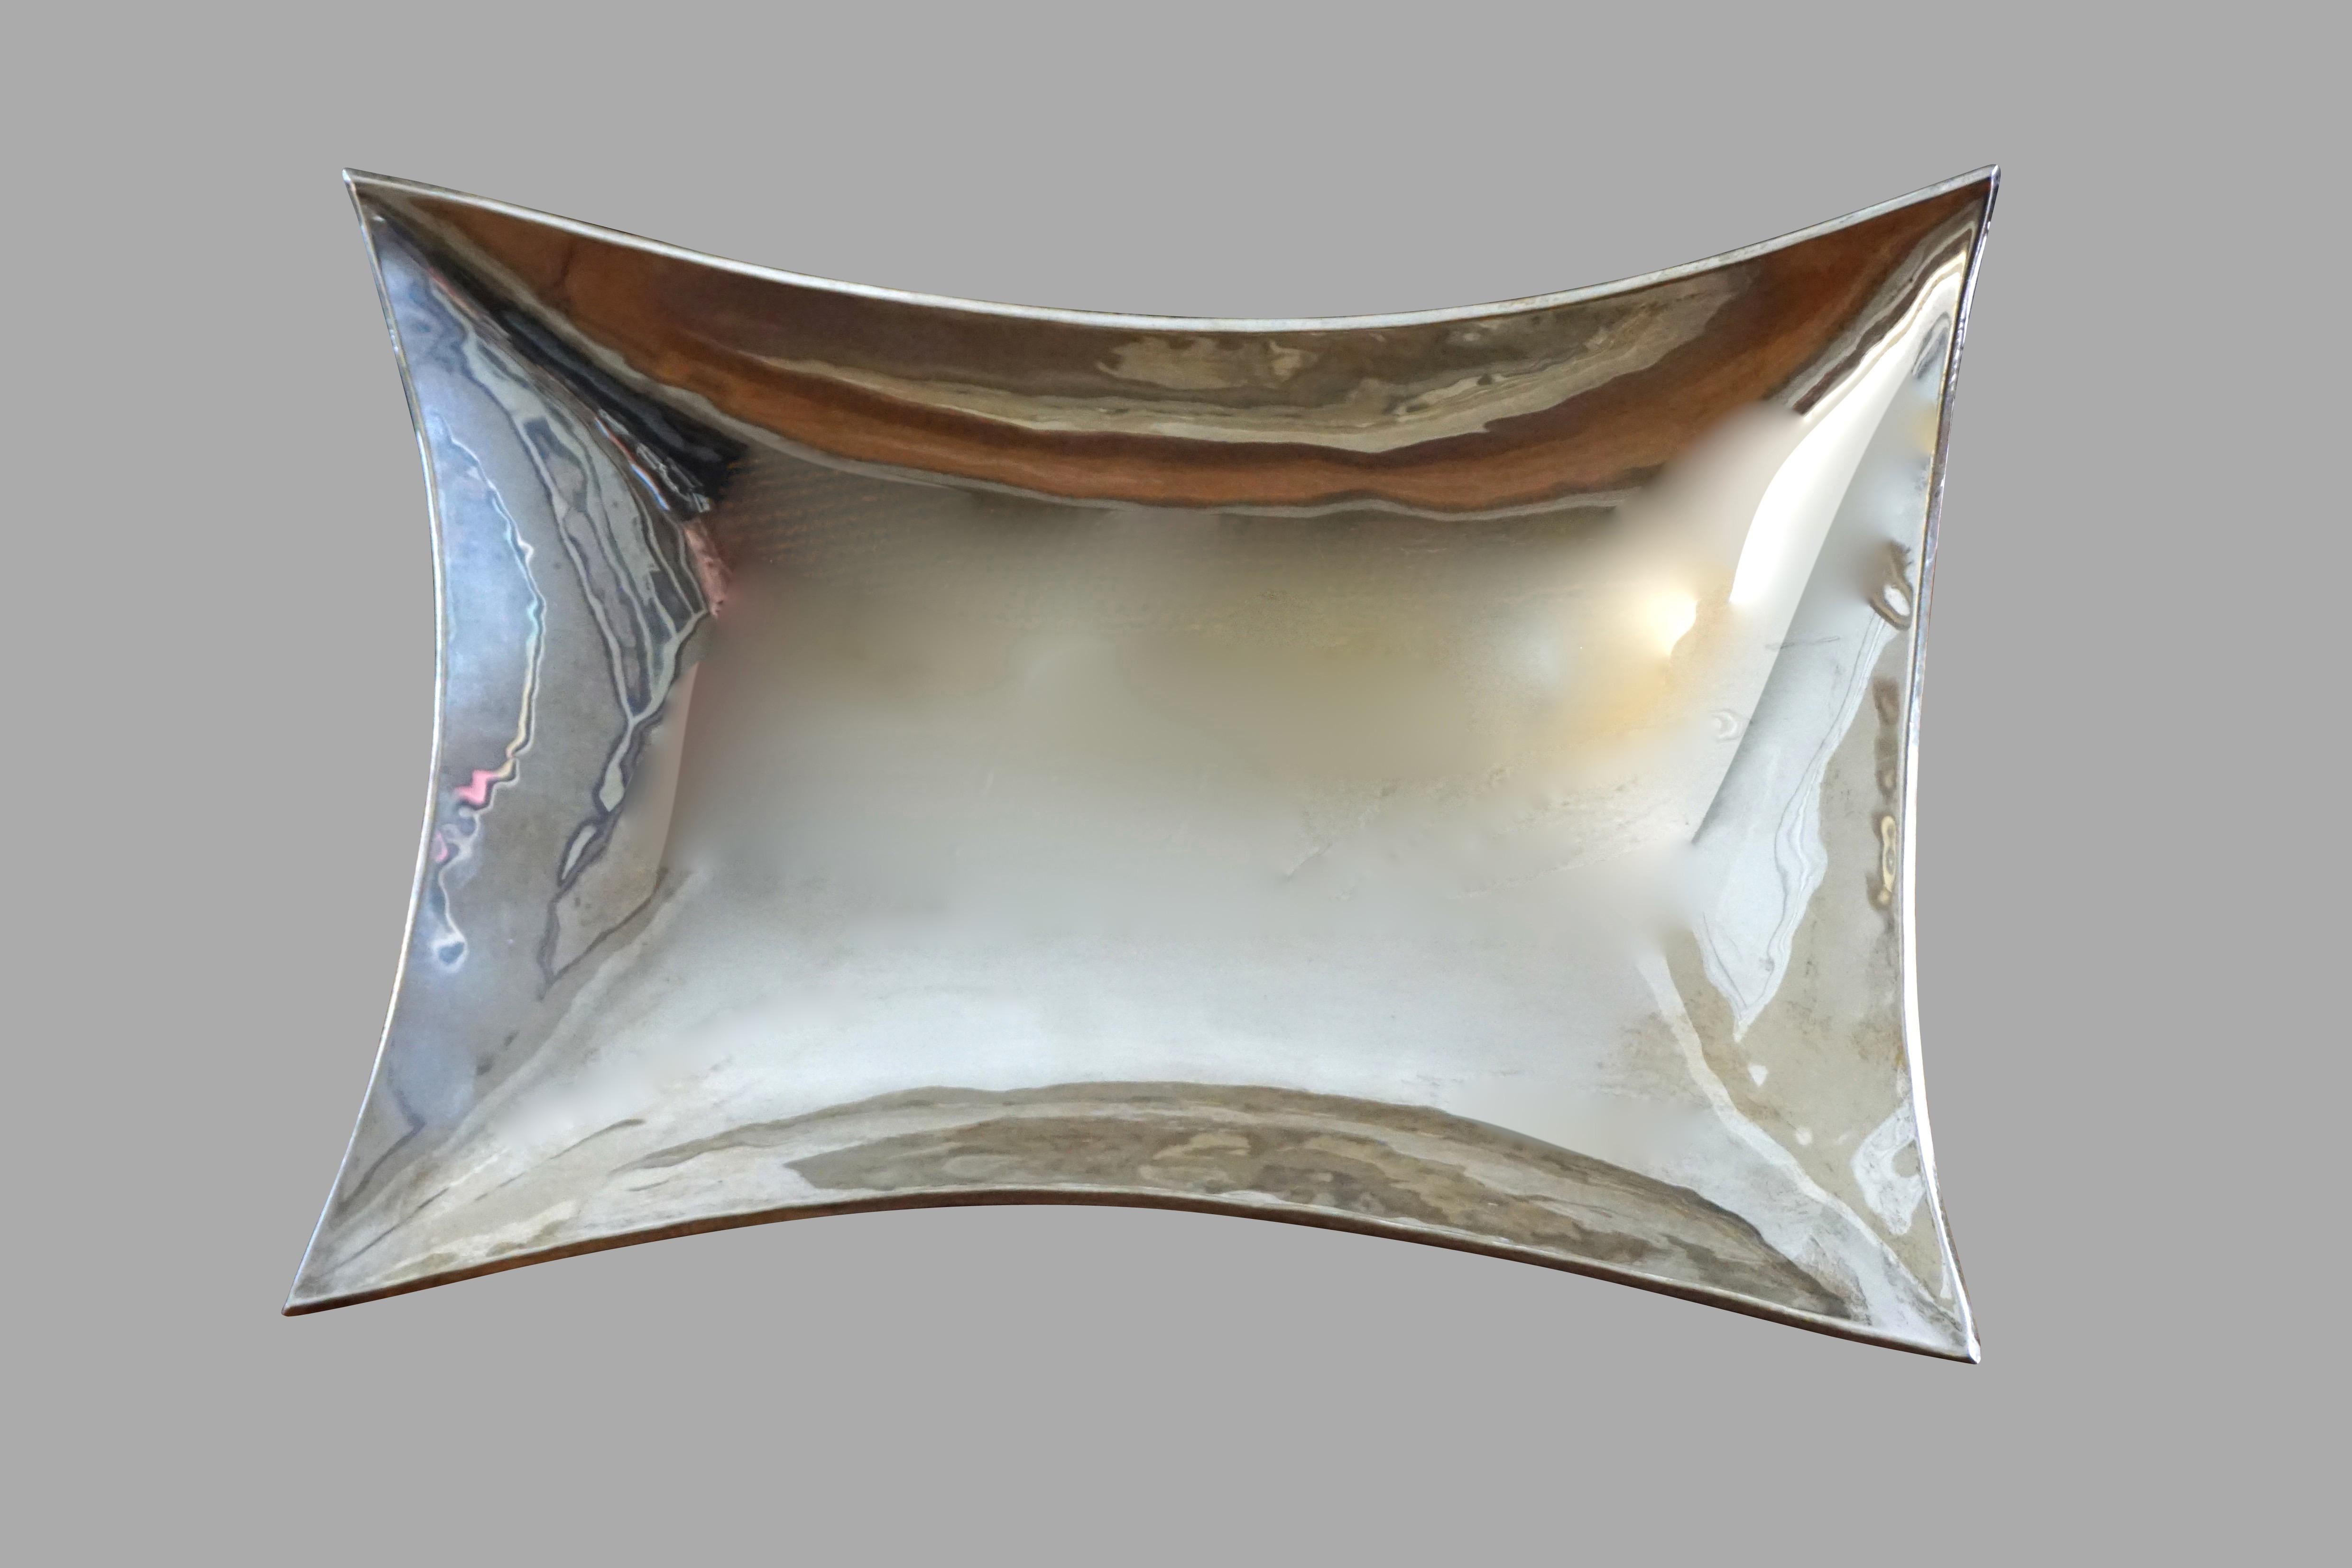 An elegant Mexican modernist sterling silver footed dish. Weight 15.6 troy oz. Stamped .925 AVM within triangle, circa 1965.